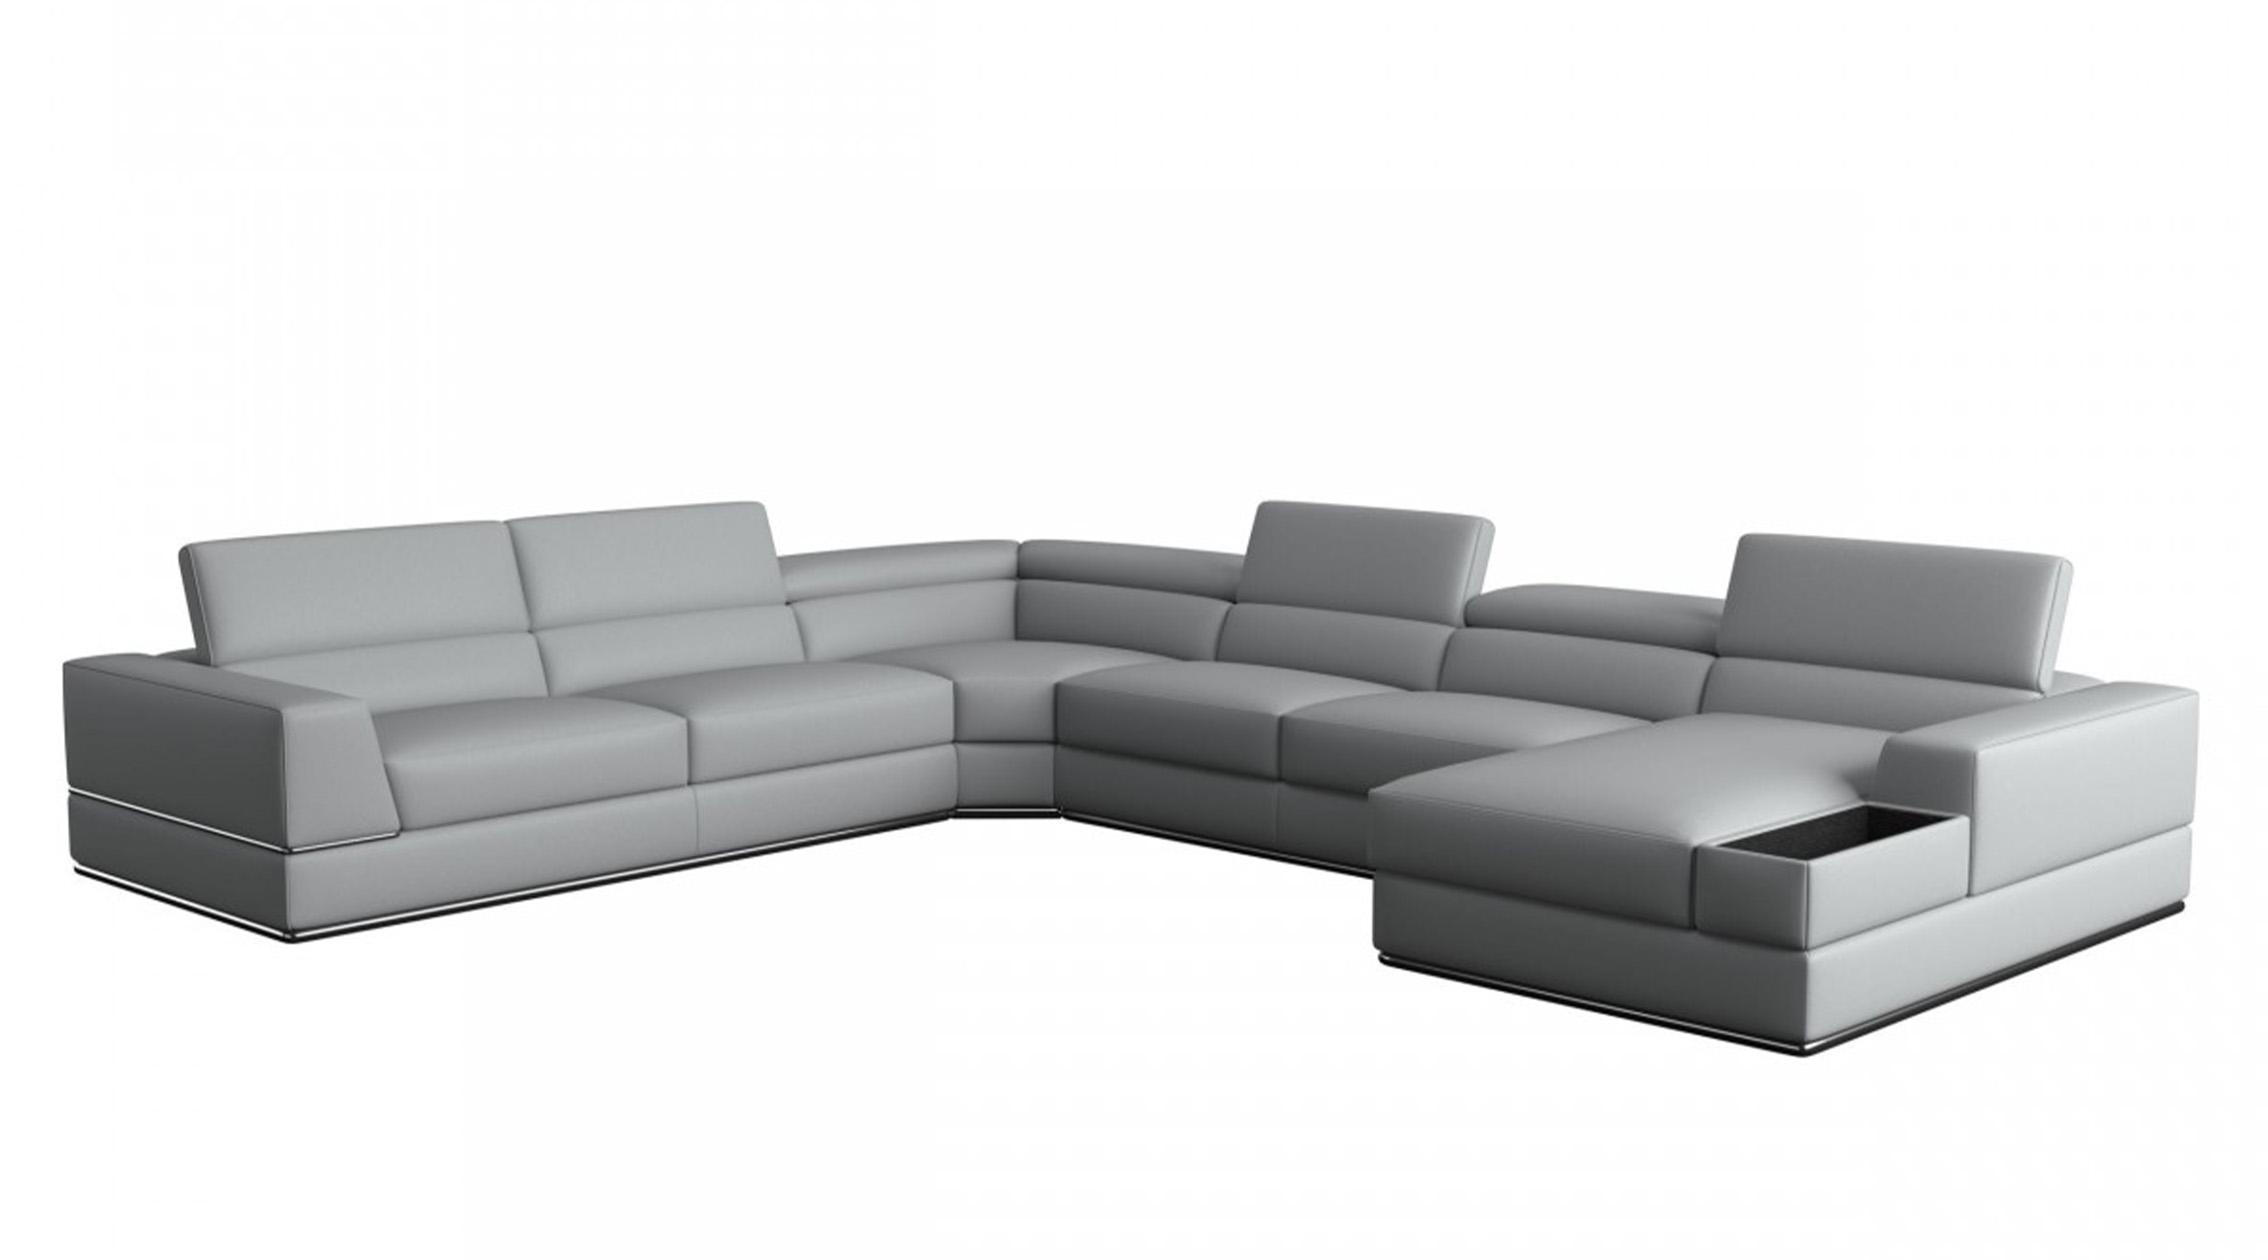 Contemporary, Modern Sectional Sofa VGCA5106O-GRY-SECT VGCA5106O-GRY-SECT in Gray Italian Leather